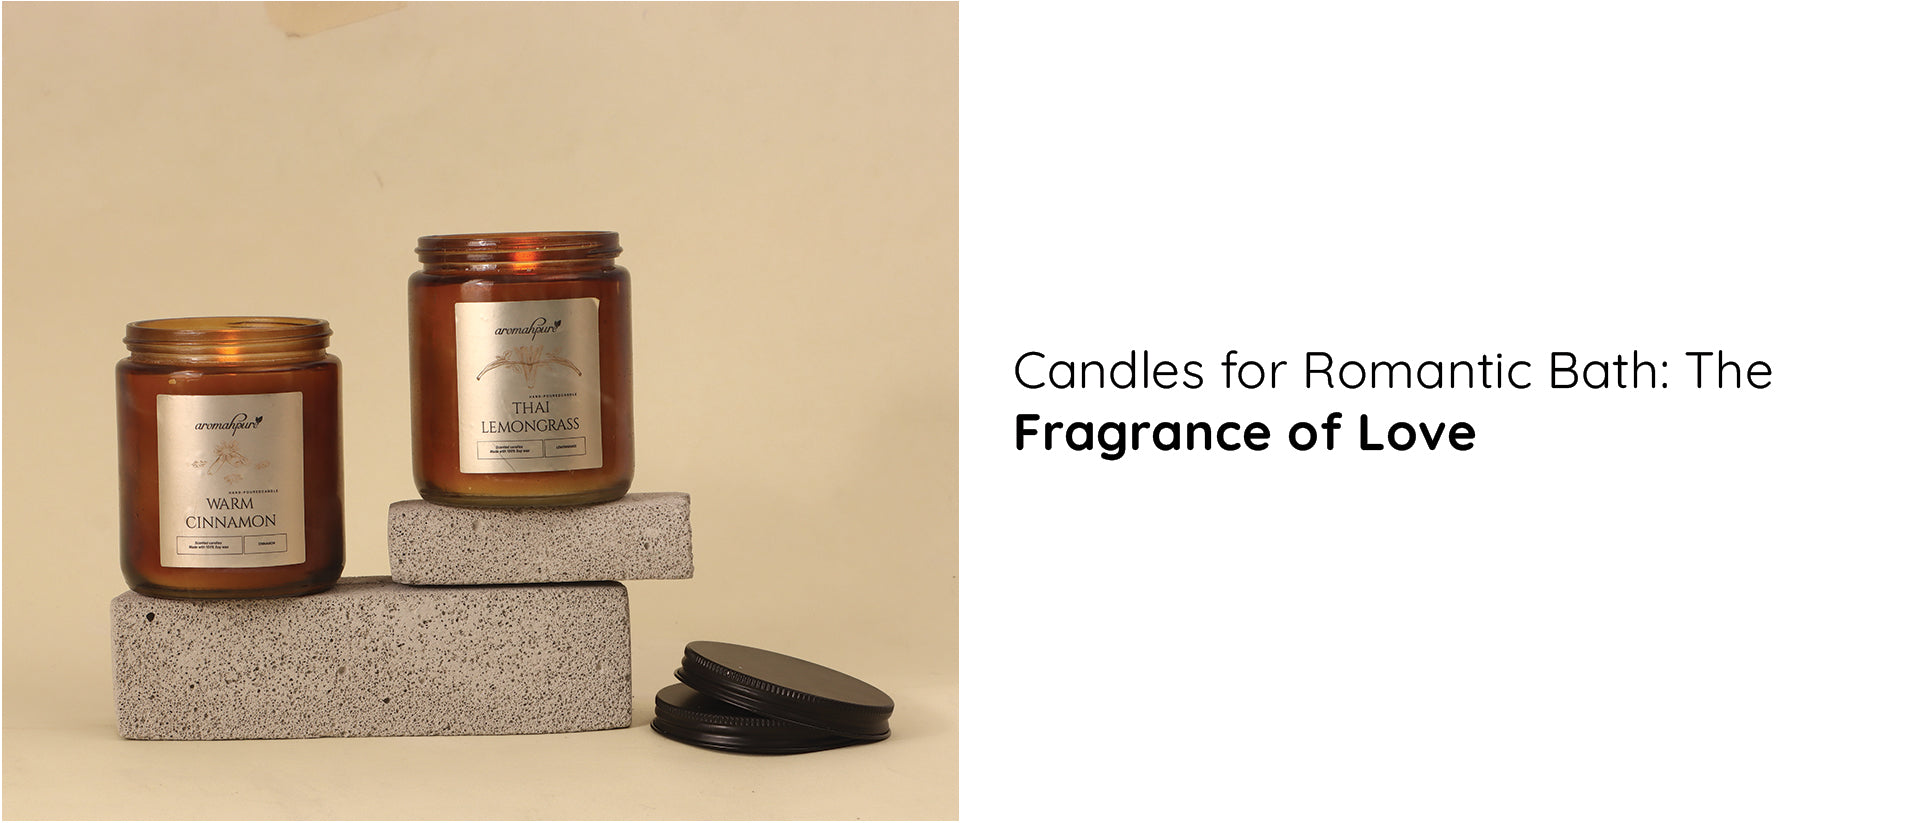 Candles for Romantic Bath: The Fragrance of Love